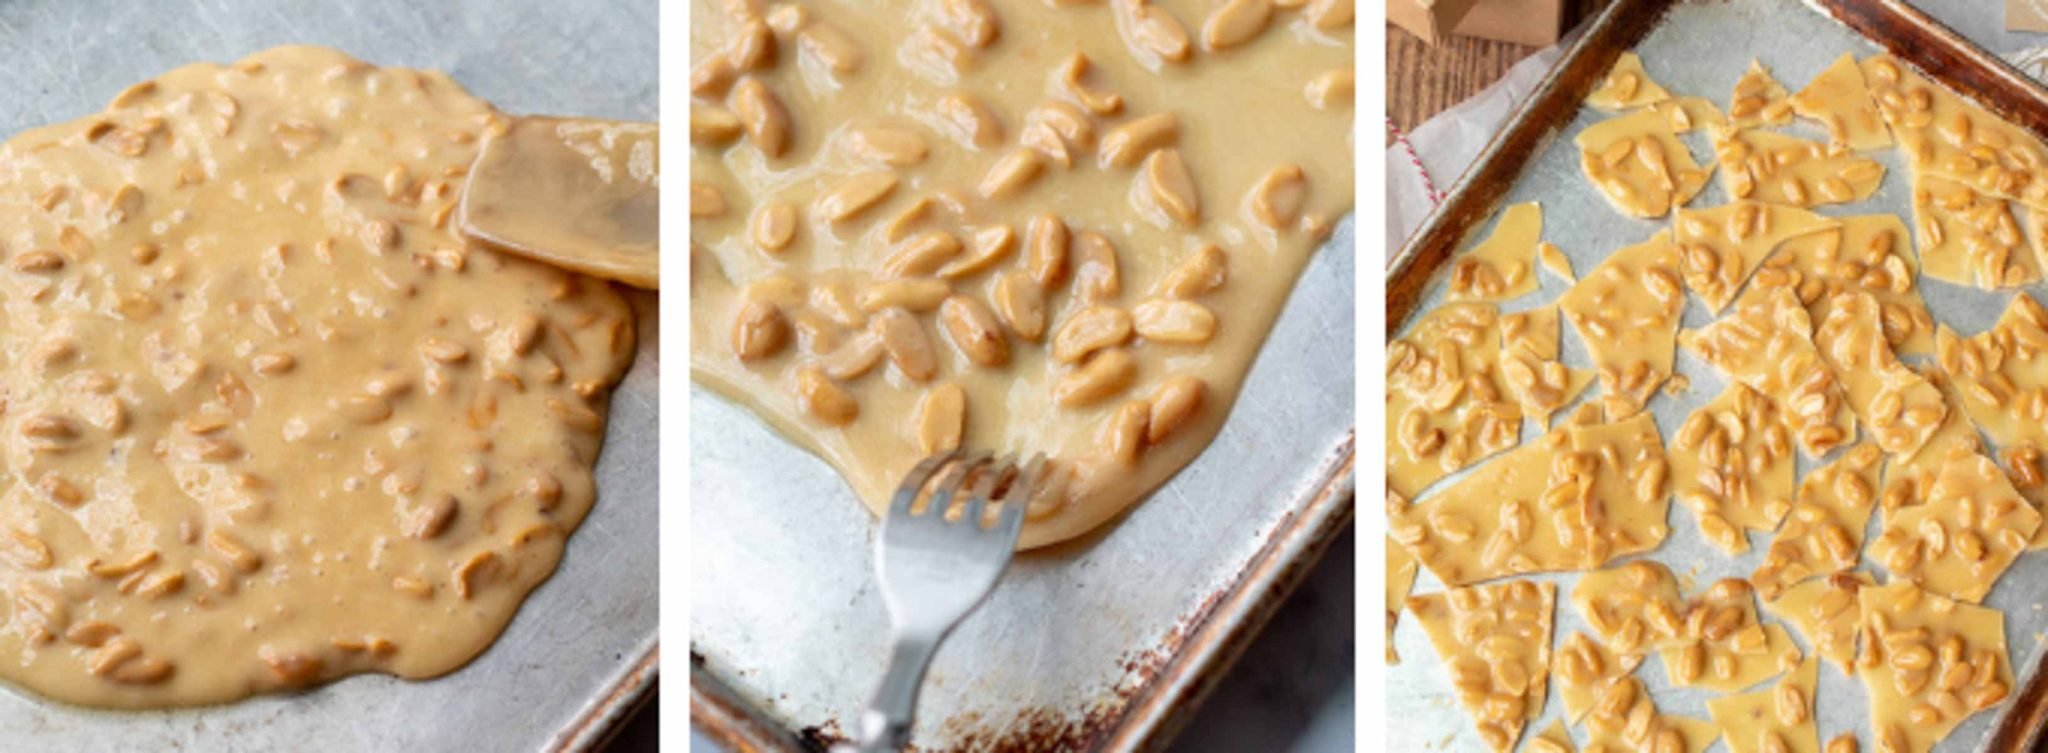 images showing how to pour and spread the brittle